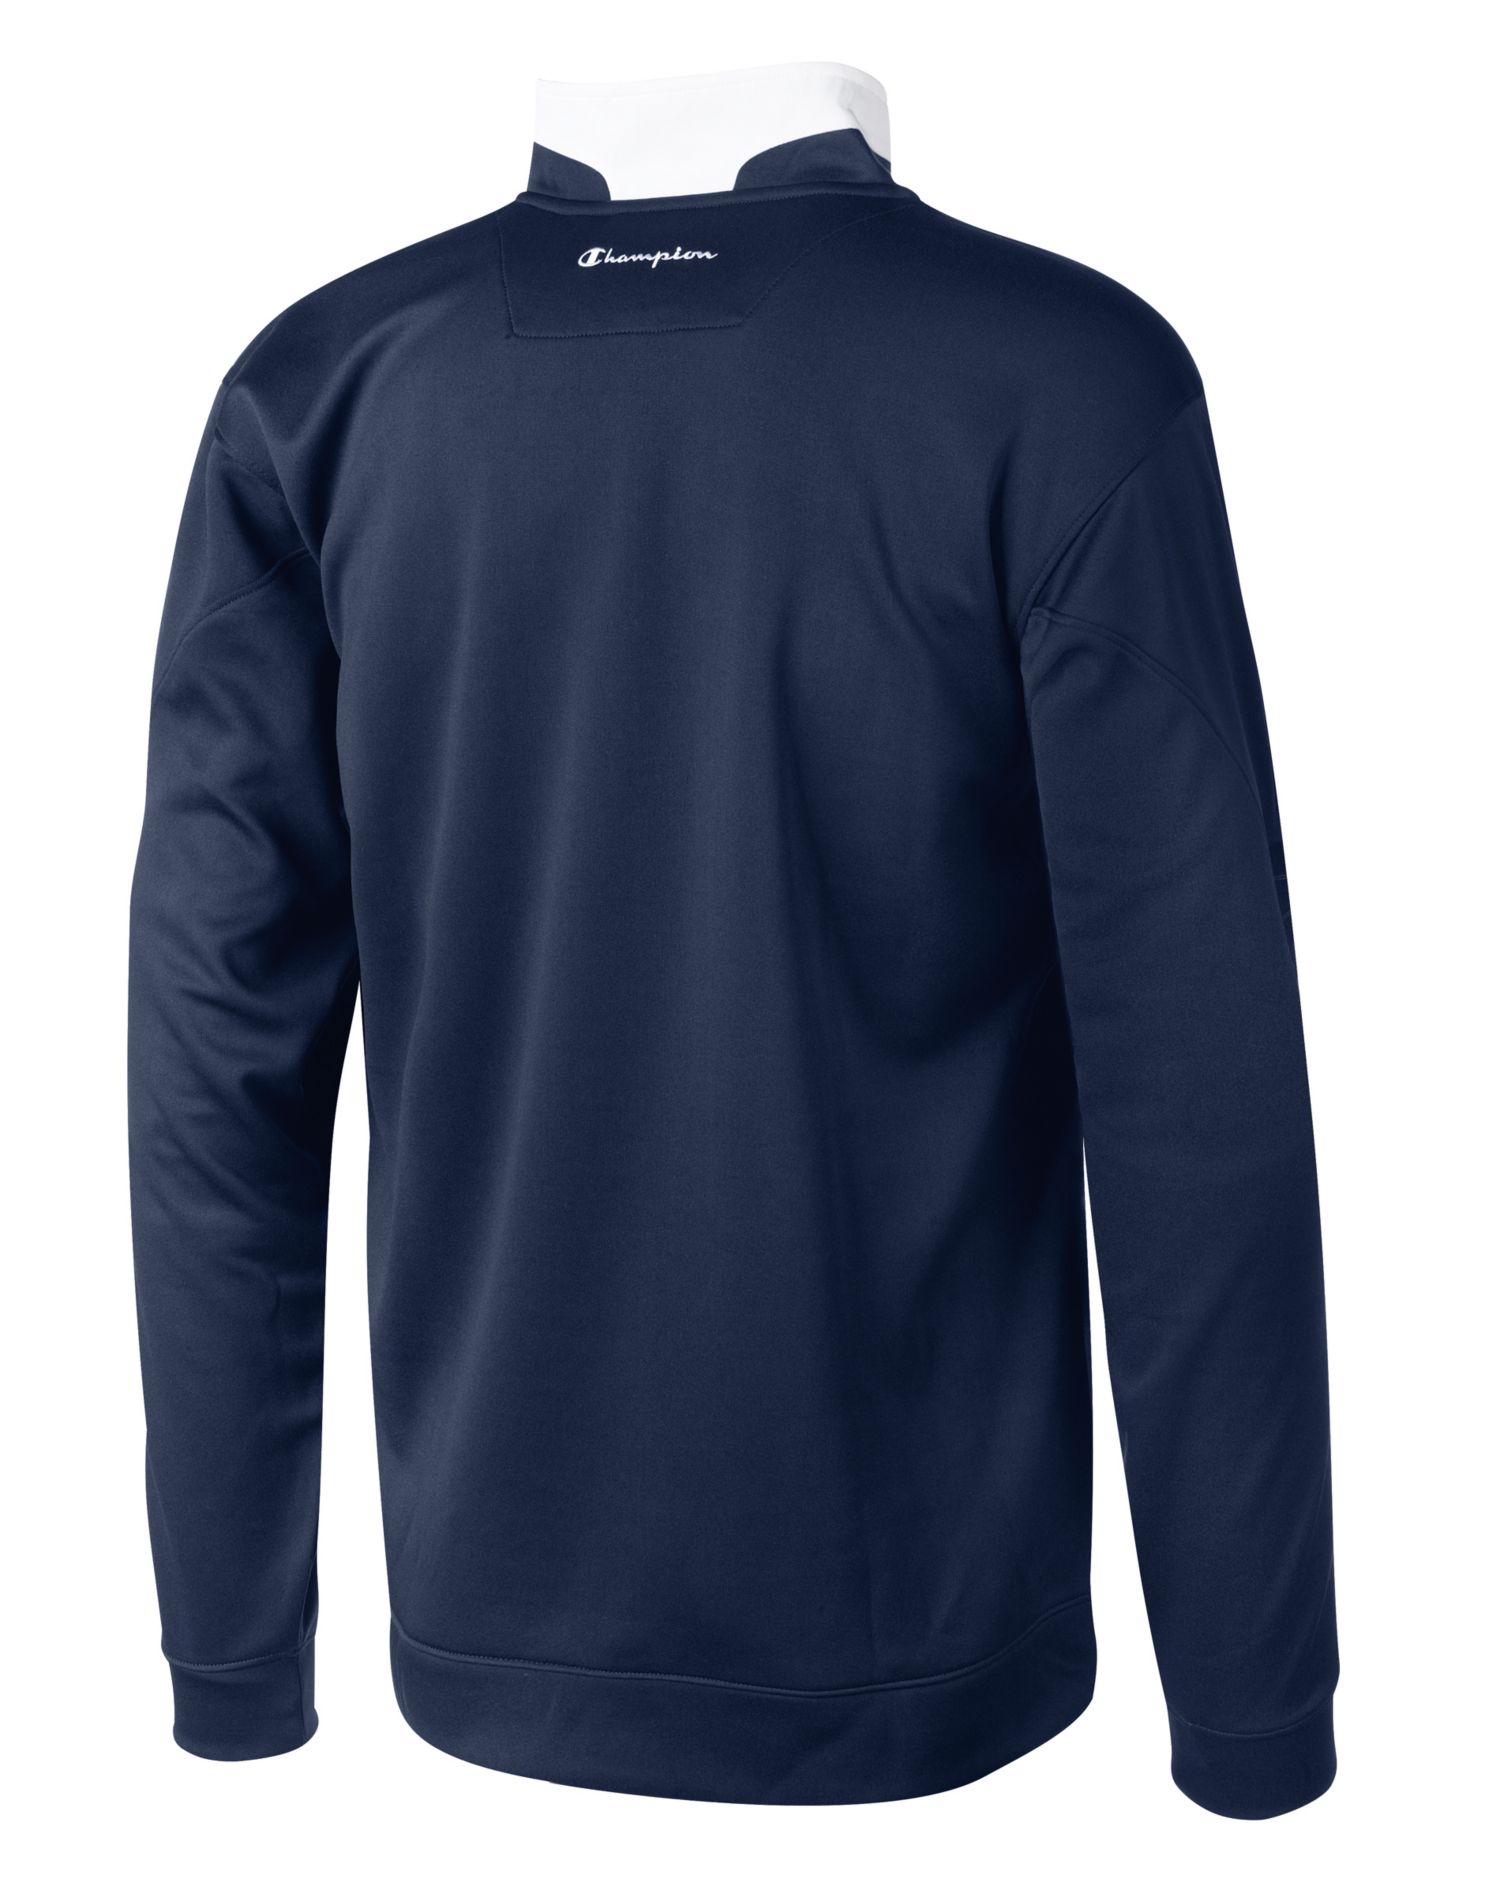 Champion Men  Long Sleeve athletic warm up and track jackets - image 2 of 2